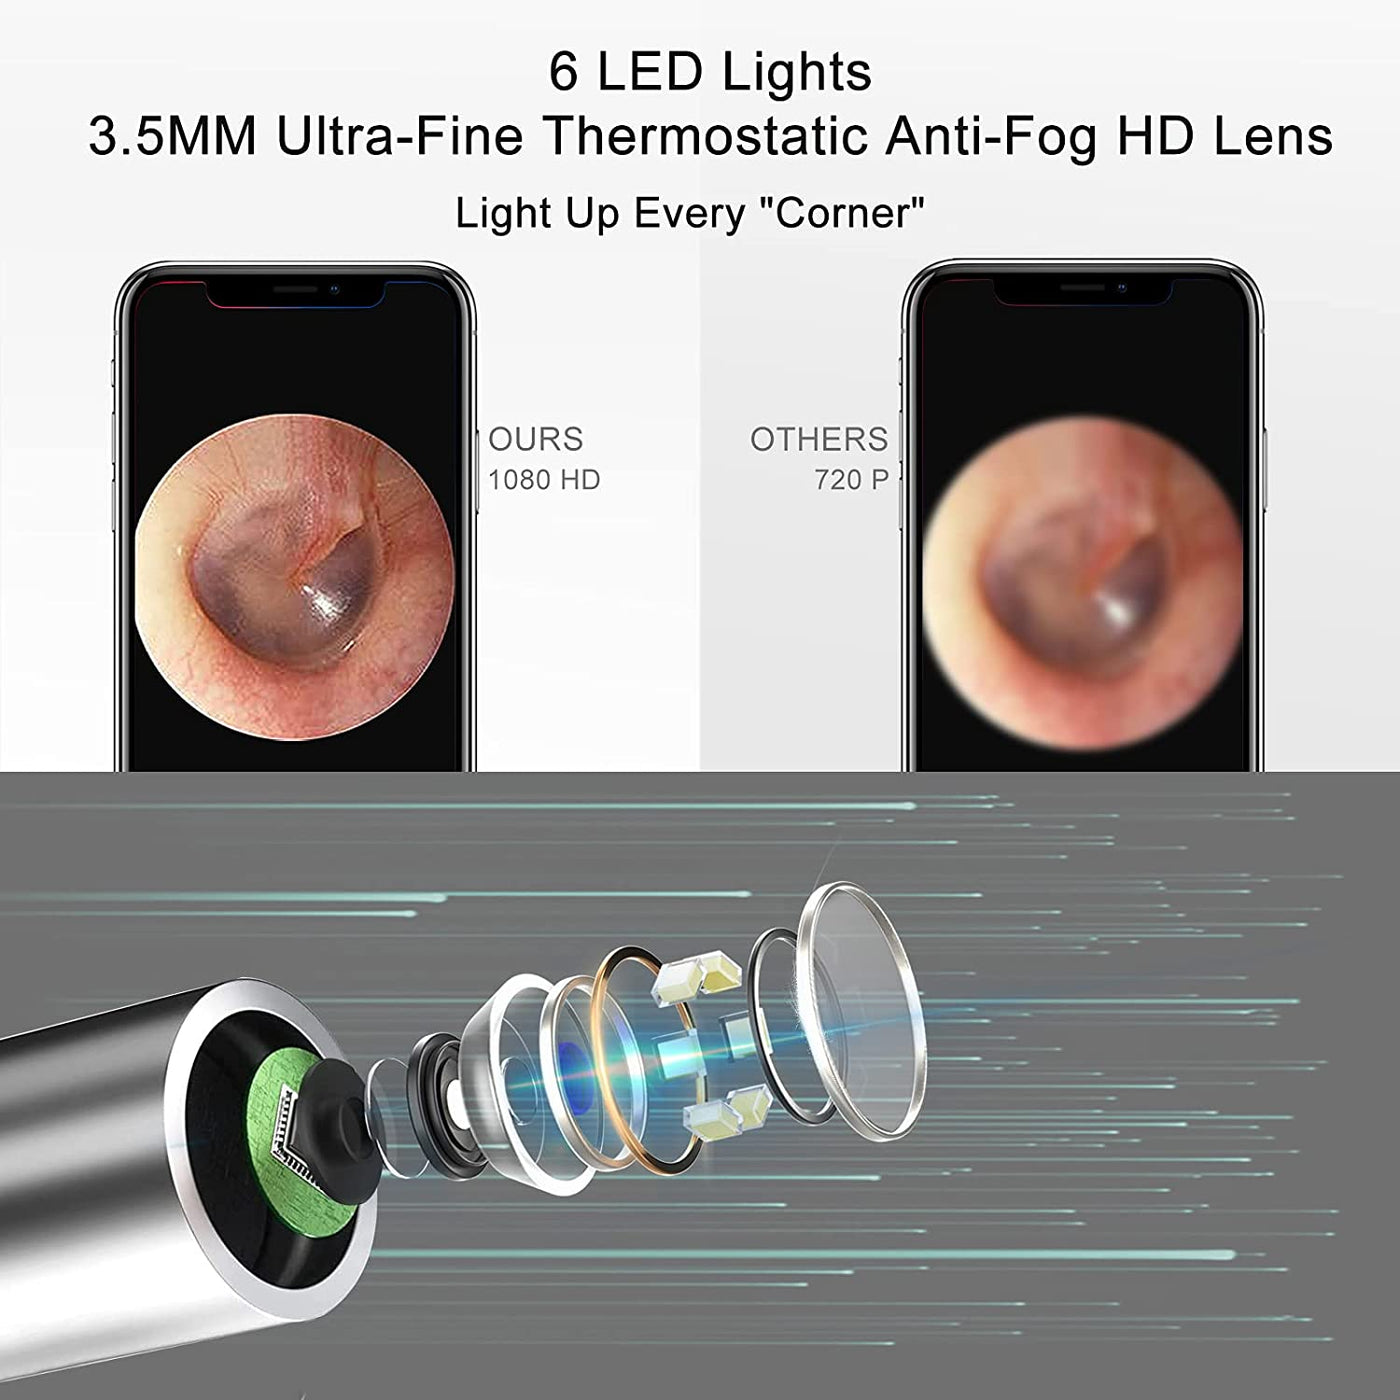 Ear Wax Removal Endoscope Earwax Cleaner, Visual Ear Cleaner with Camera, WiFi Earwax Cleaner Tool with 1080P HD Camera and 6 LEDs Compatible with Android/iOS (Matte Black)